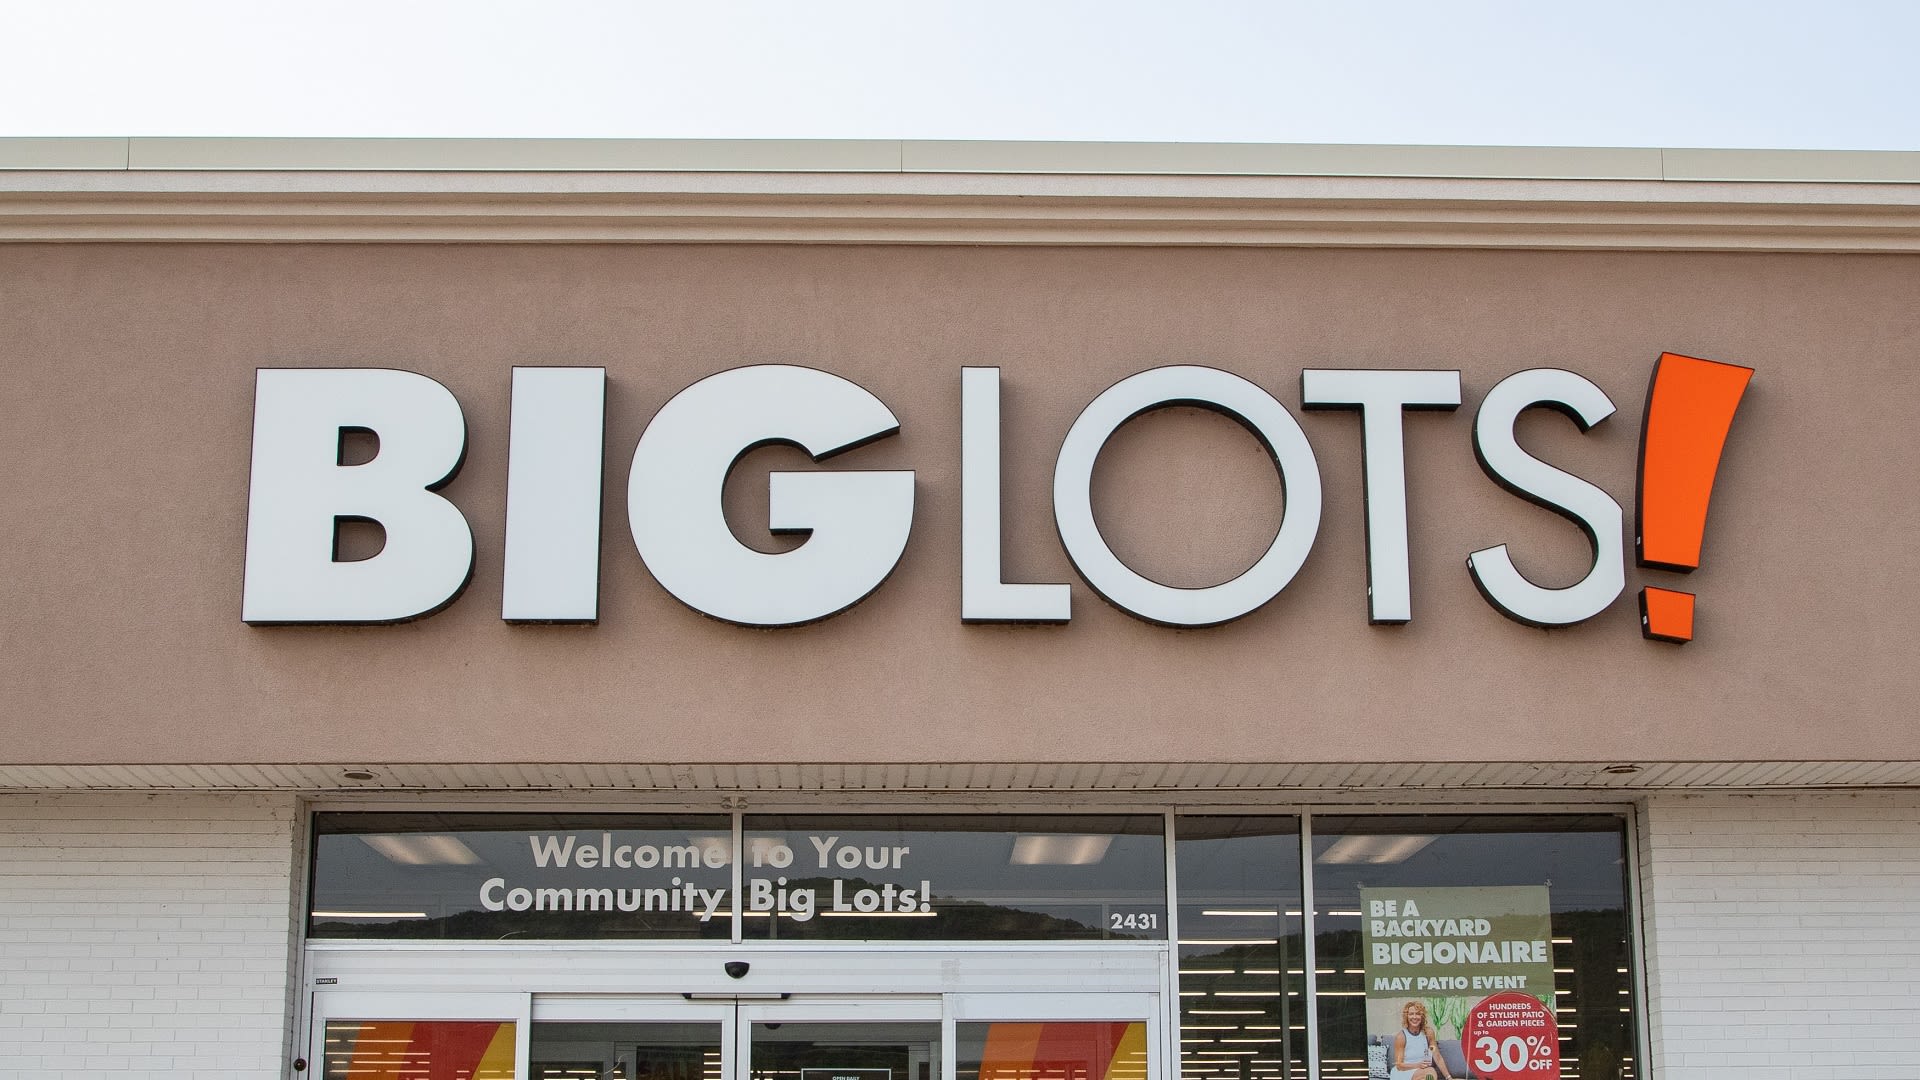 5 Great Alternatives to Big Lots To Consider as the Retailer Announces Store Closures